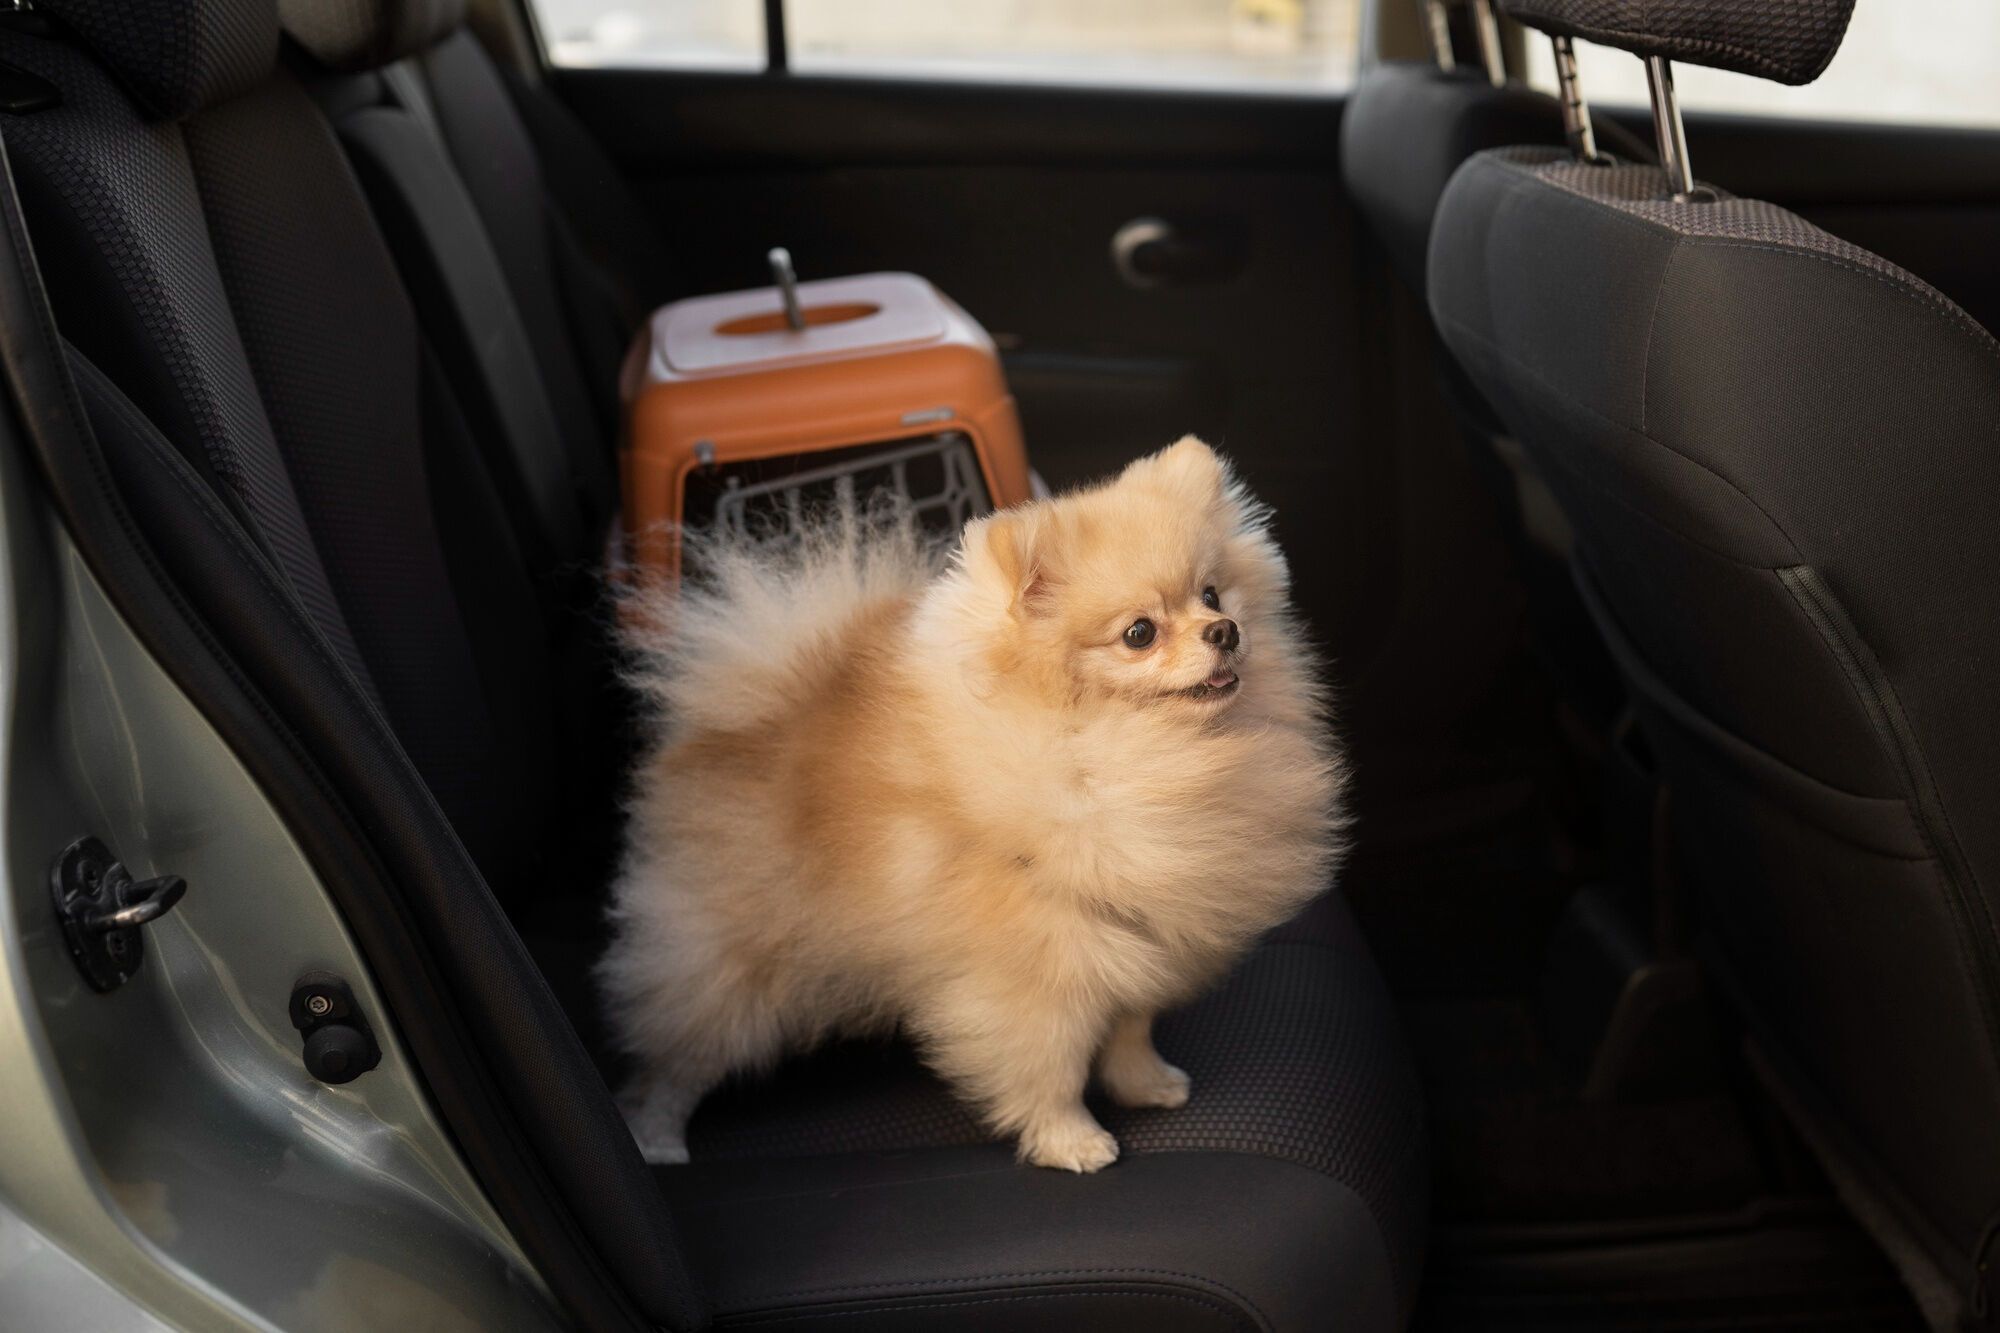 Recommendations for traveling by air with pets